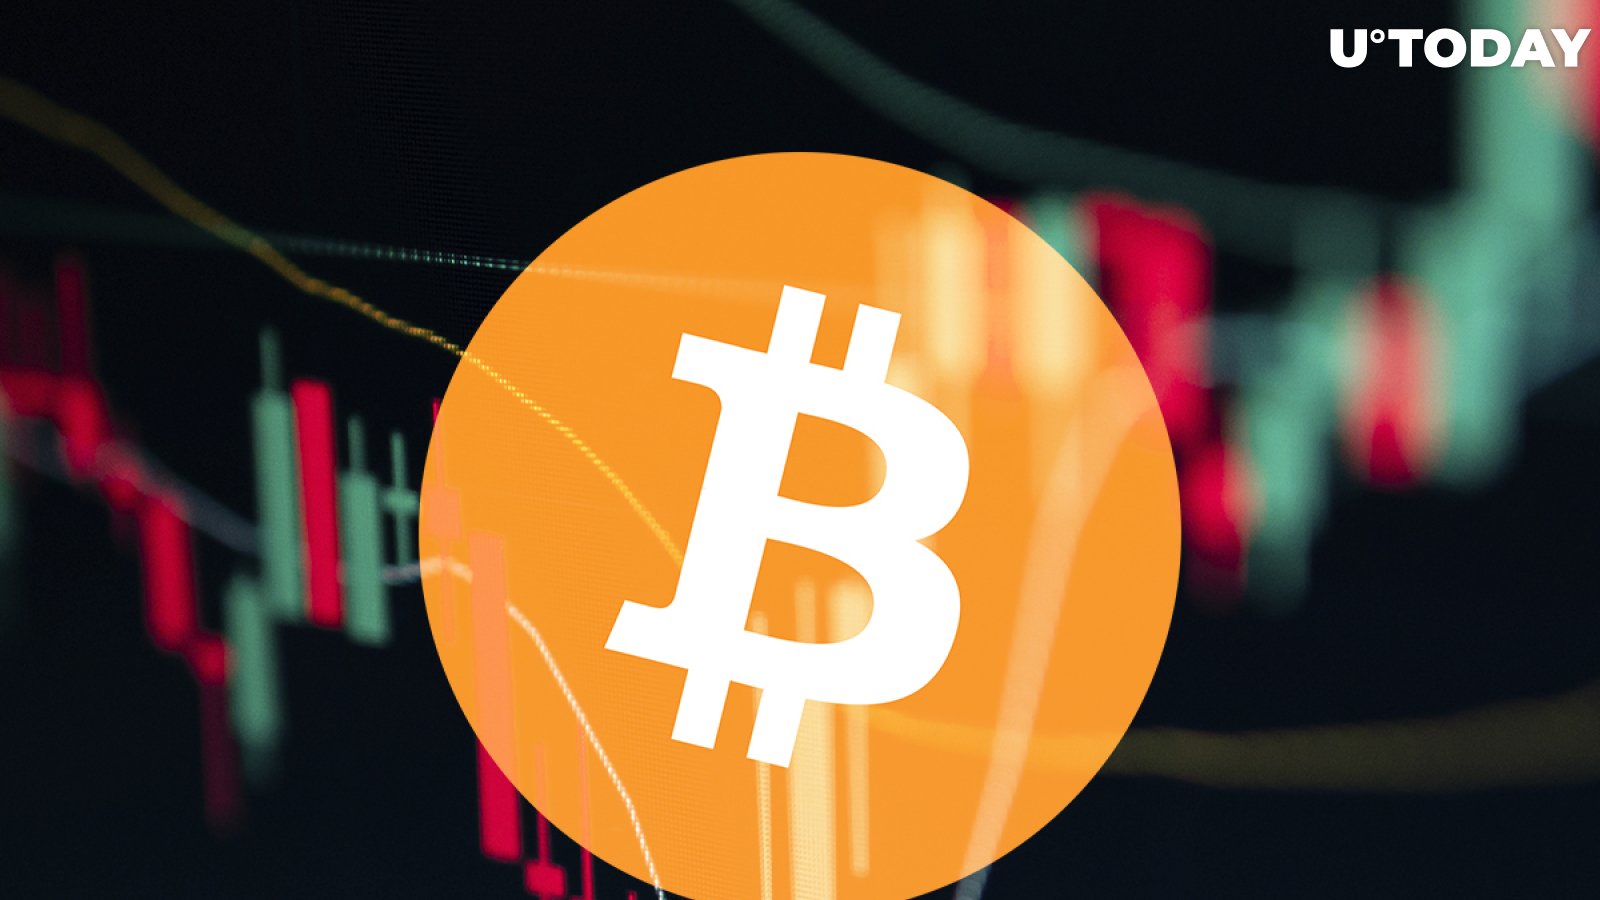 Bitcoin Likely to Hit New All-Time Highs in the Near Future, Key Metrics Say: CryptoQuant